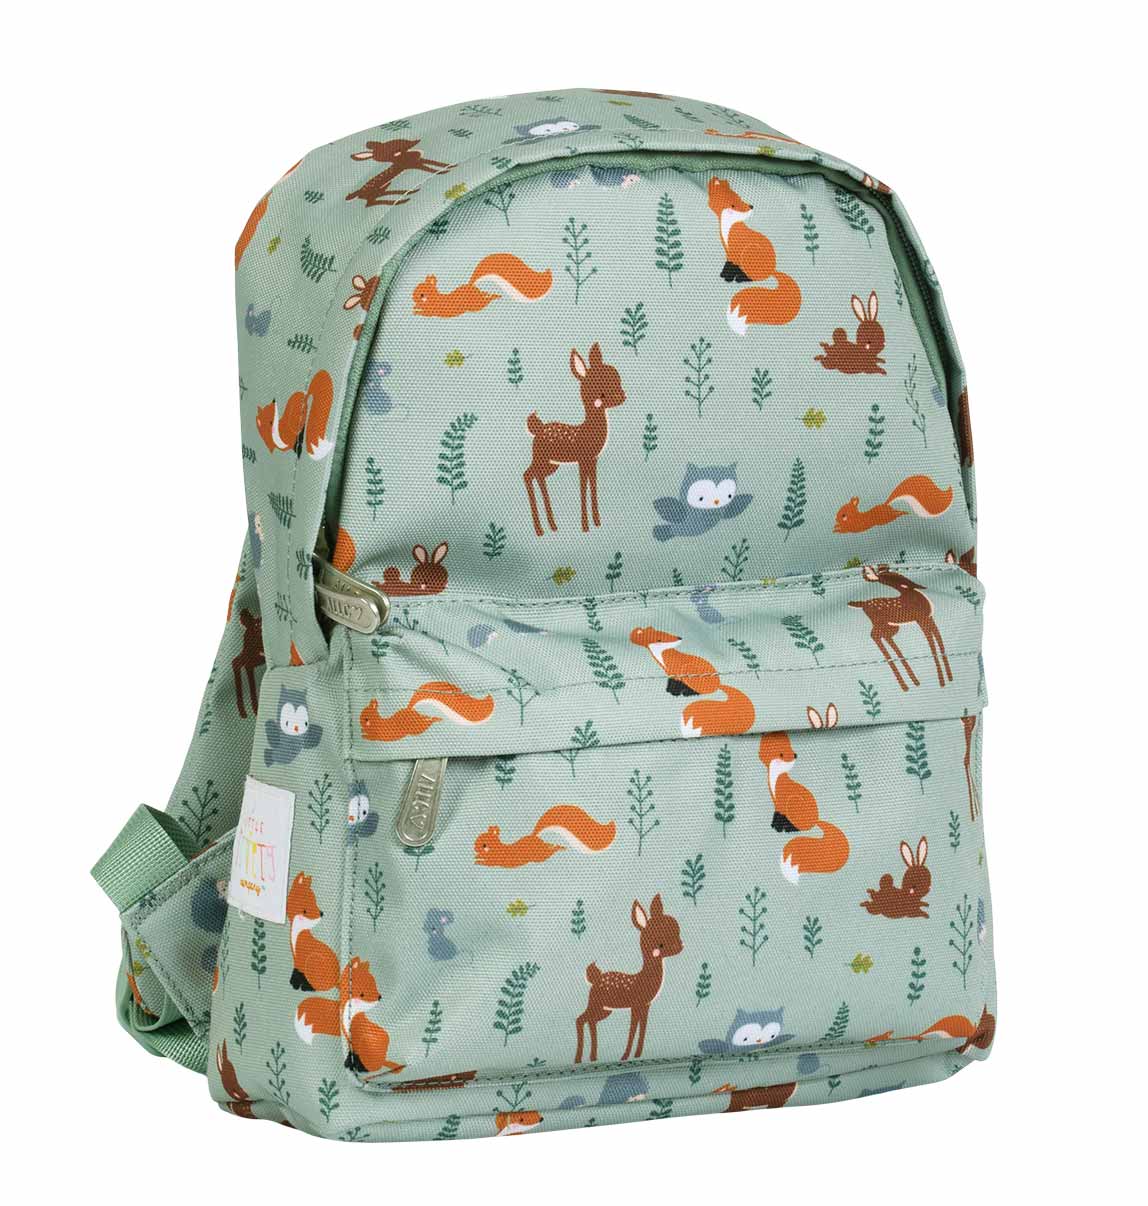 A LITTLE LOVELY COMPANY - Little backpack - Forest friends